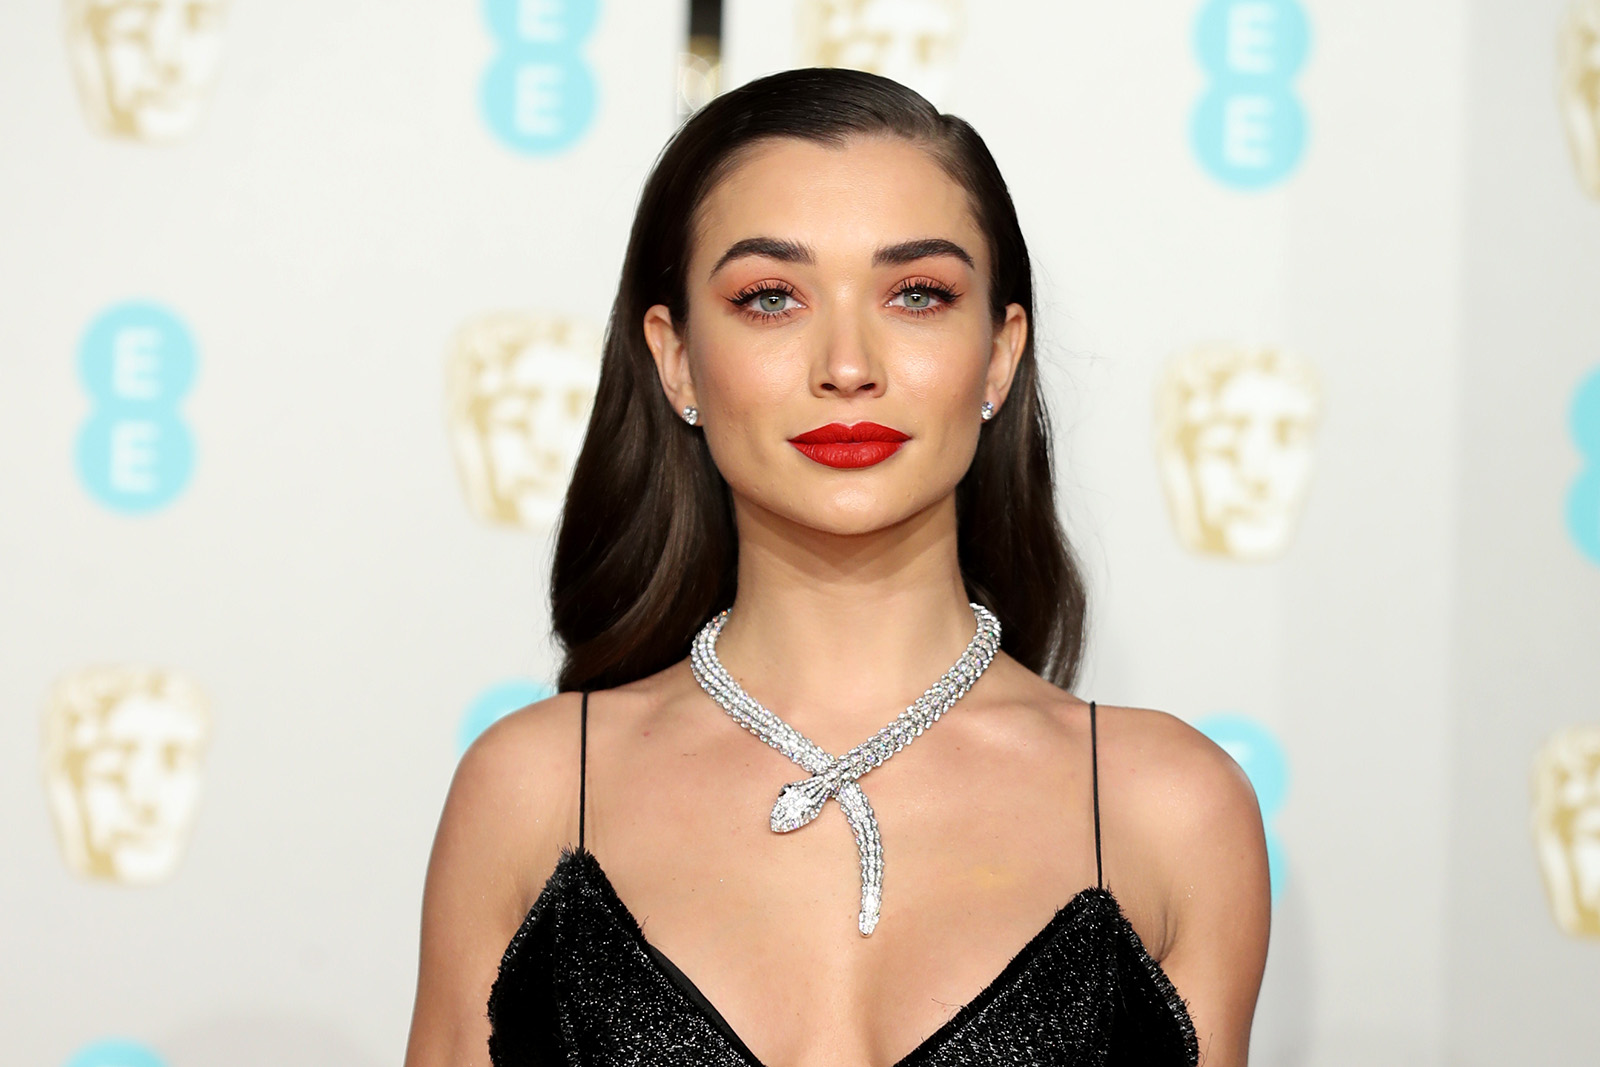  Amy Jackson at the 2019 BAFTA awards wearing Bulgari ‘Serpenti’ necklace with 74.78ct diamonds in white gold 